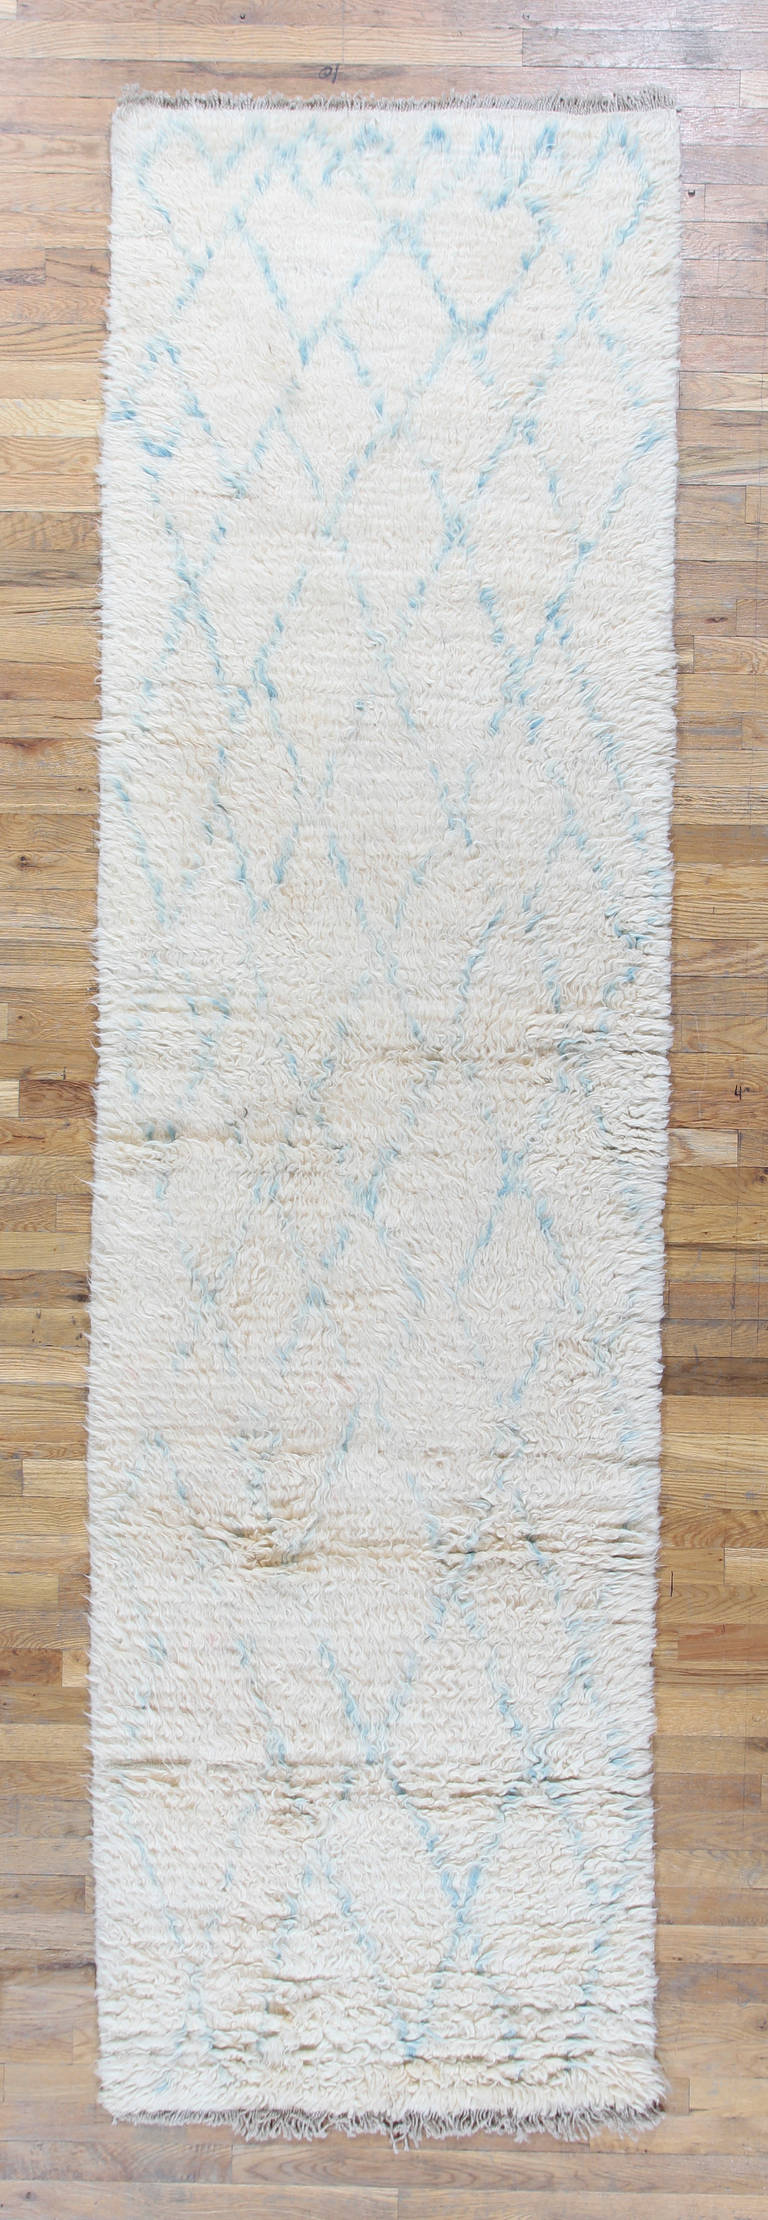 This Hand Woven Moroccan Runner has a deep wool pile using the highest quality of natural ivory wool and bold, geometric light blue pattern.

This classical pattern is modern an arranged to fill the elongated field beautifully. These expansive